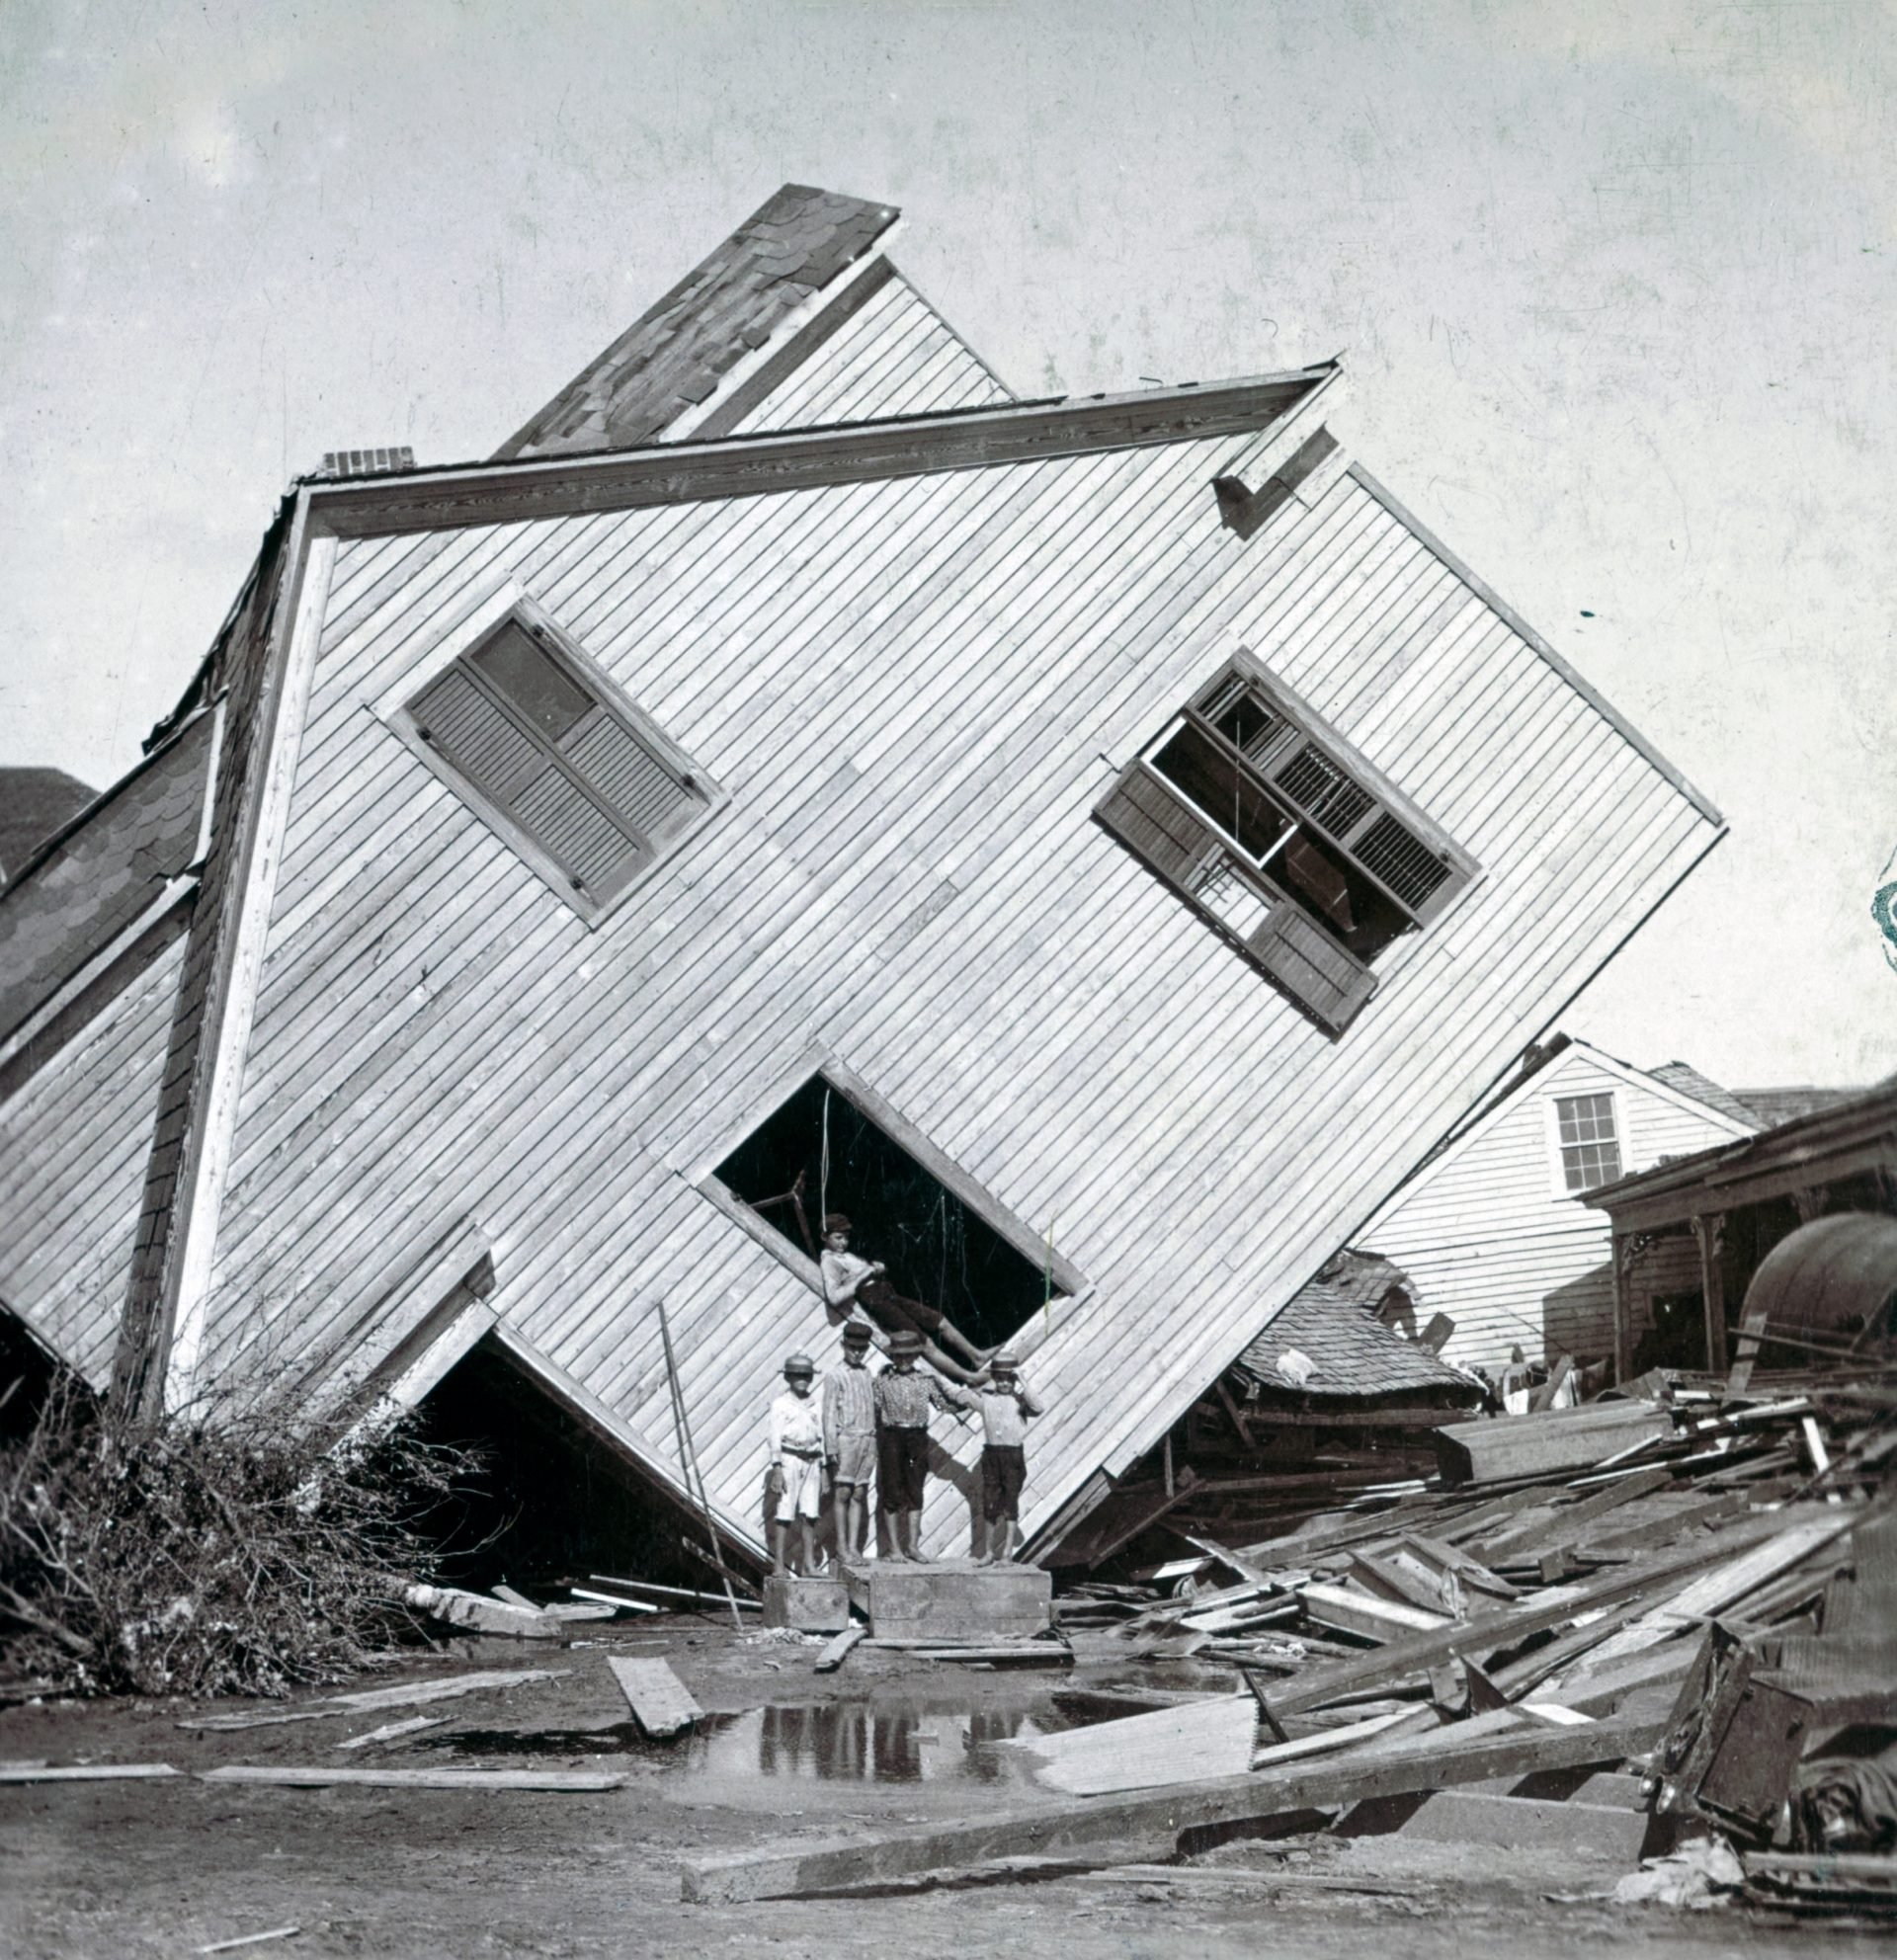 Photograph shows a house tipped on side, with several boys standing in front, after a flood in Galveston, Texas